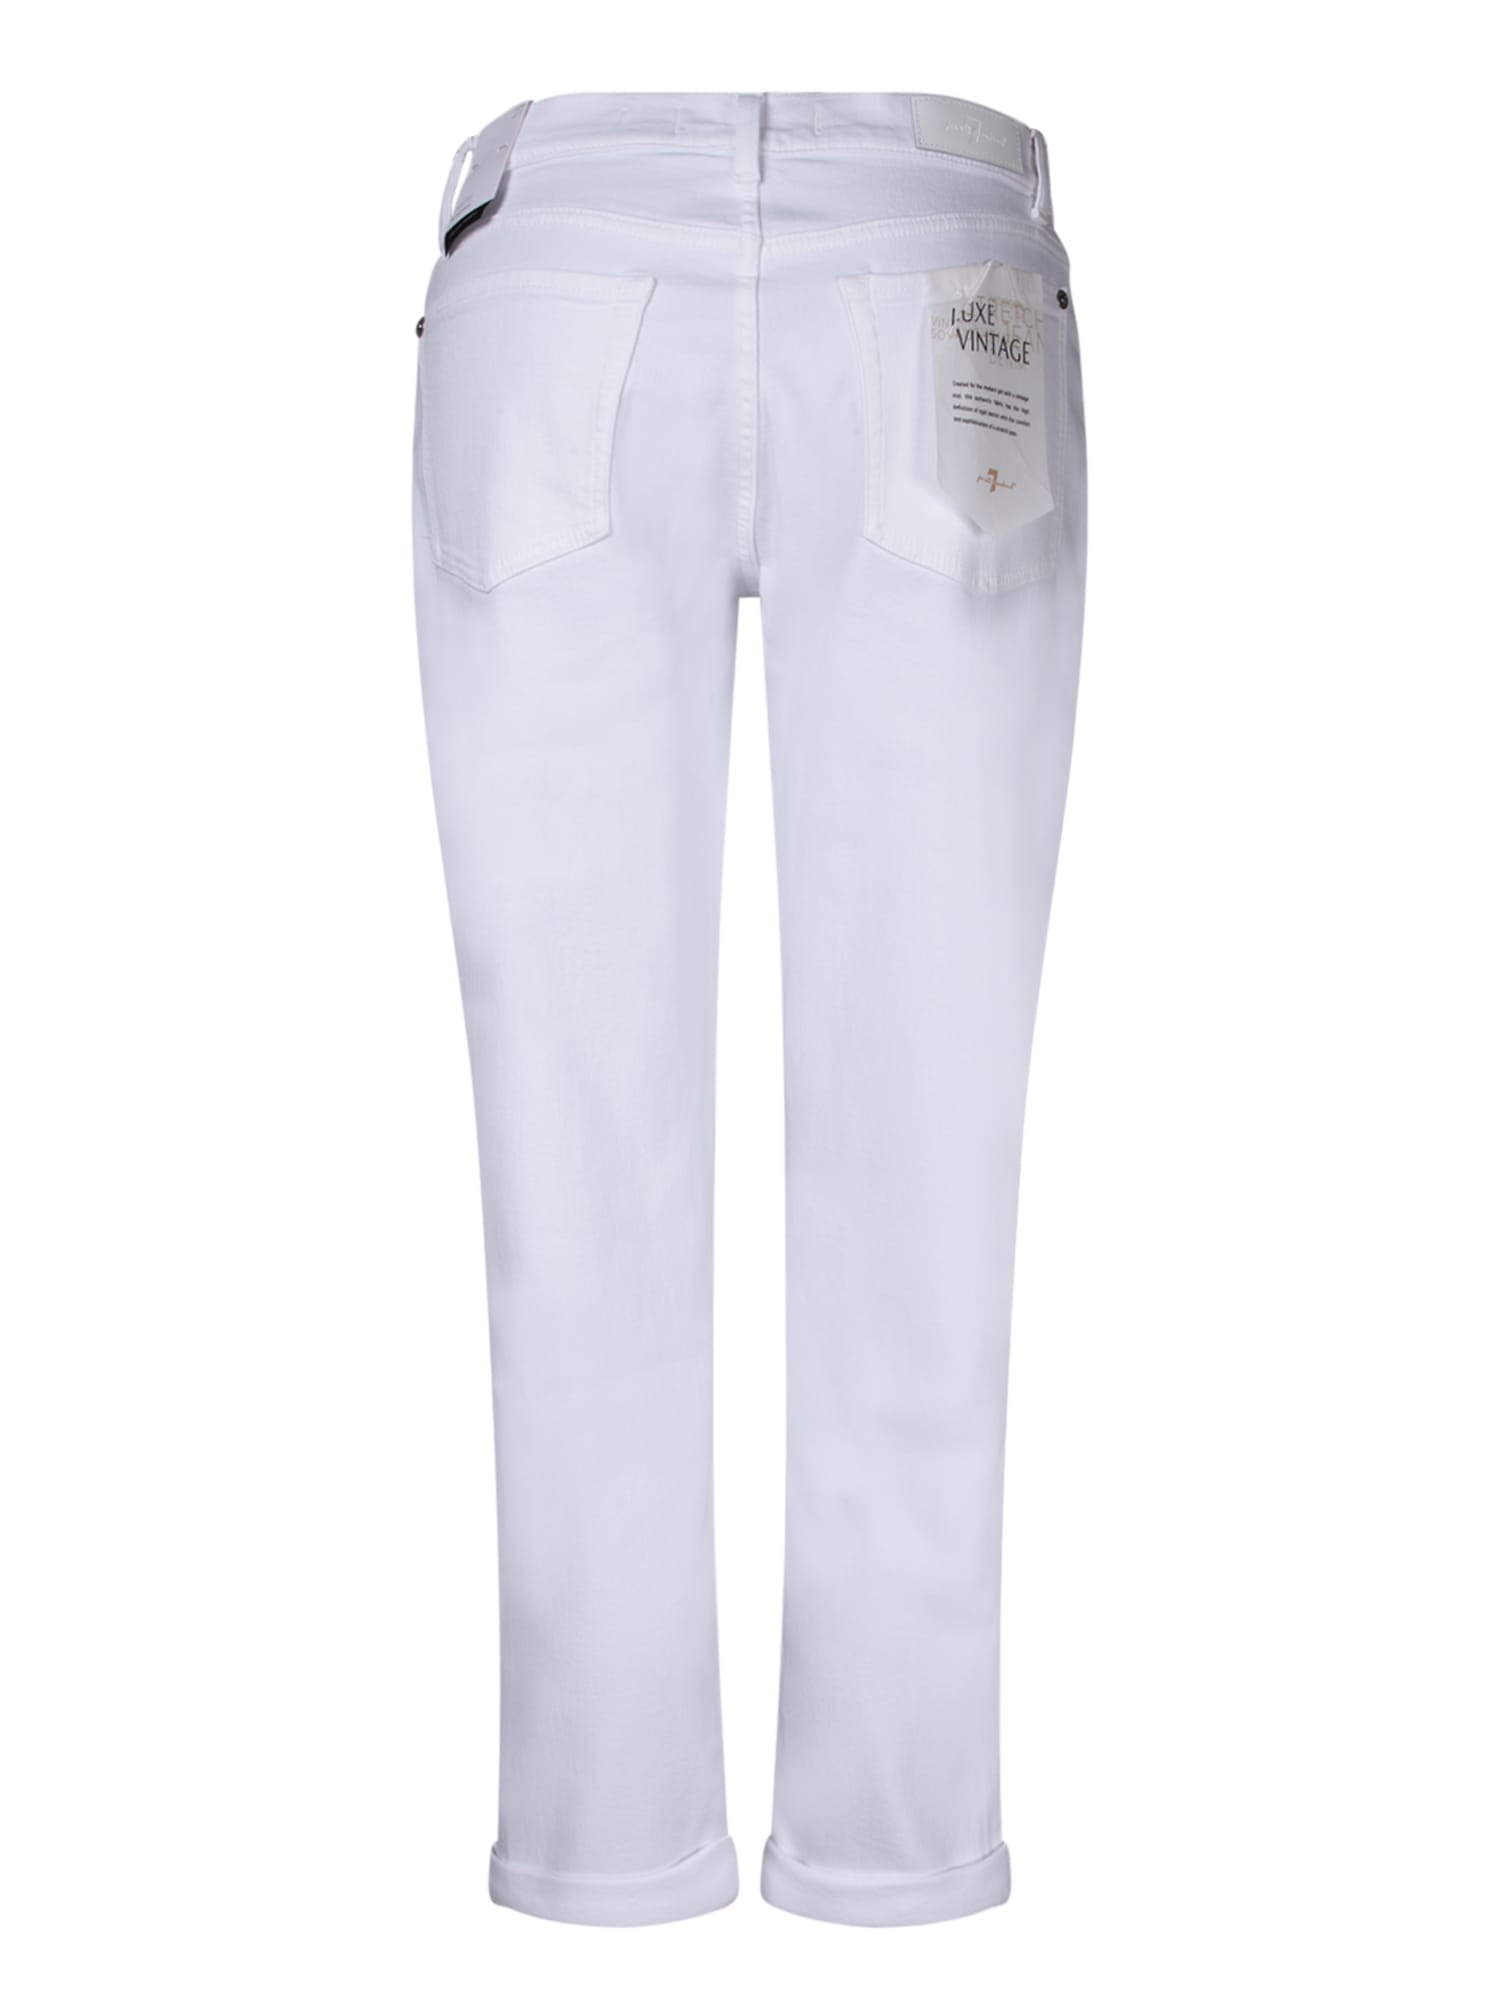 Shop 7 For All Mankind Josefina White Jeans By